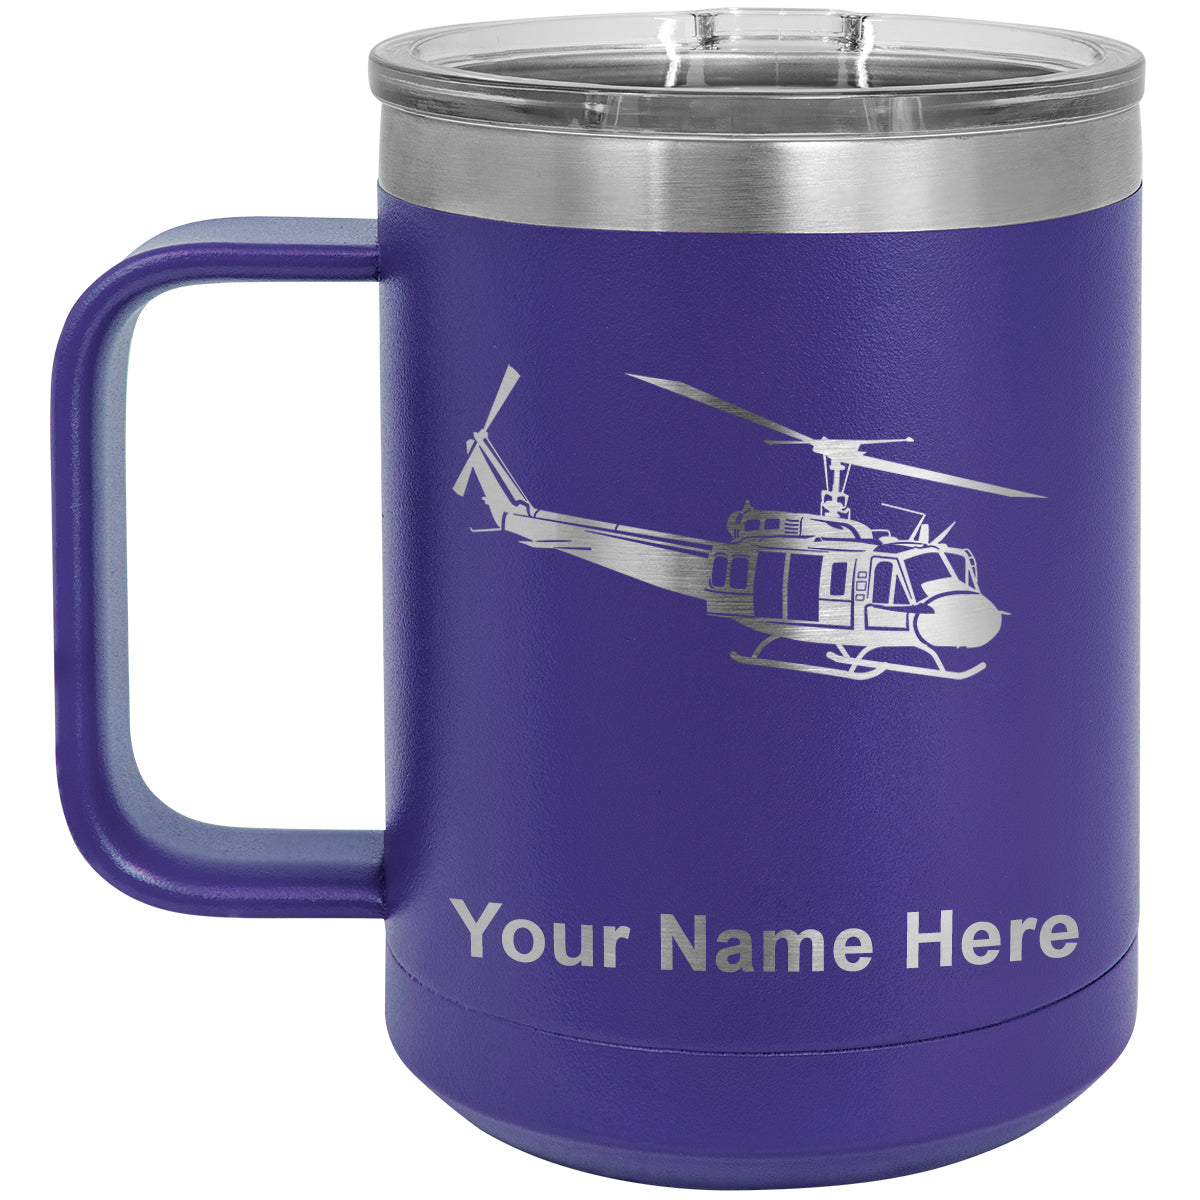 15oz Vacuum Insulated Coffee Mug, Military Helicopter 2, Personalized Engraving Included